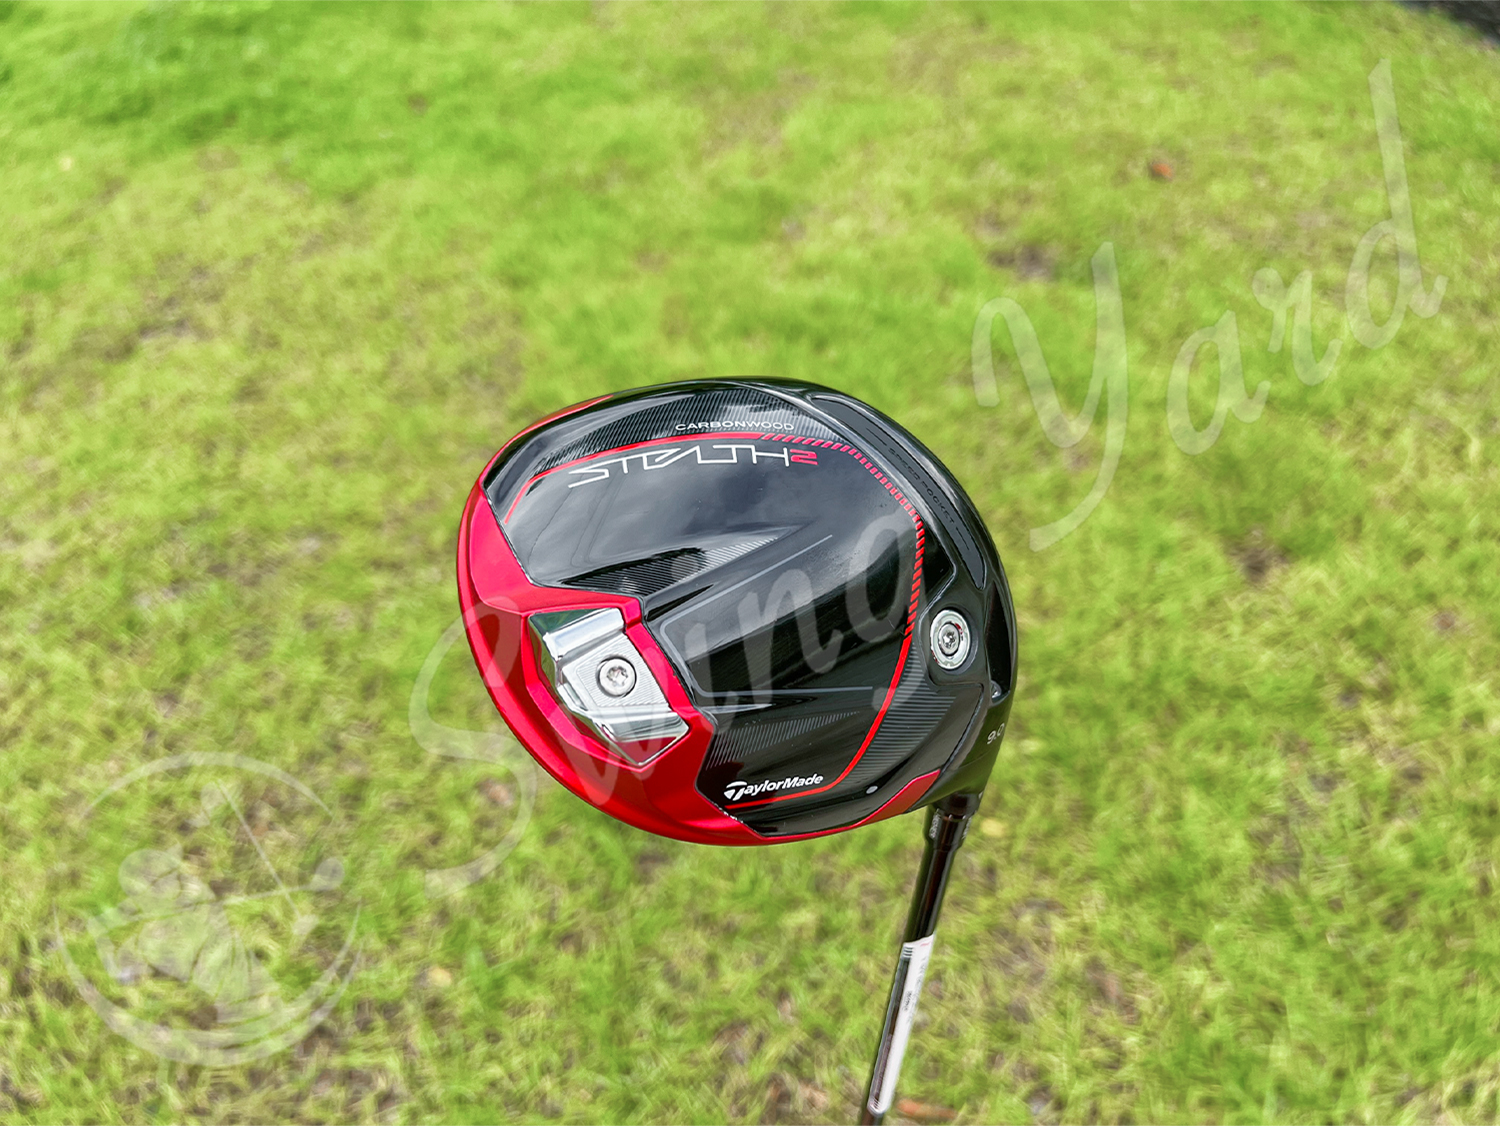 A 9.0 TaylorMade Stealth 2 driver for testing at the golf course